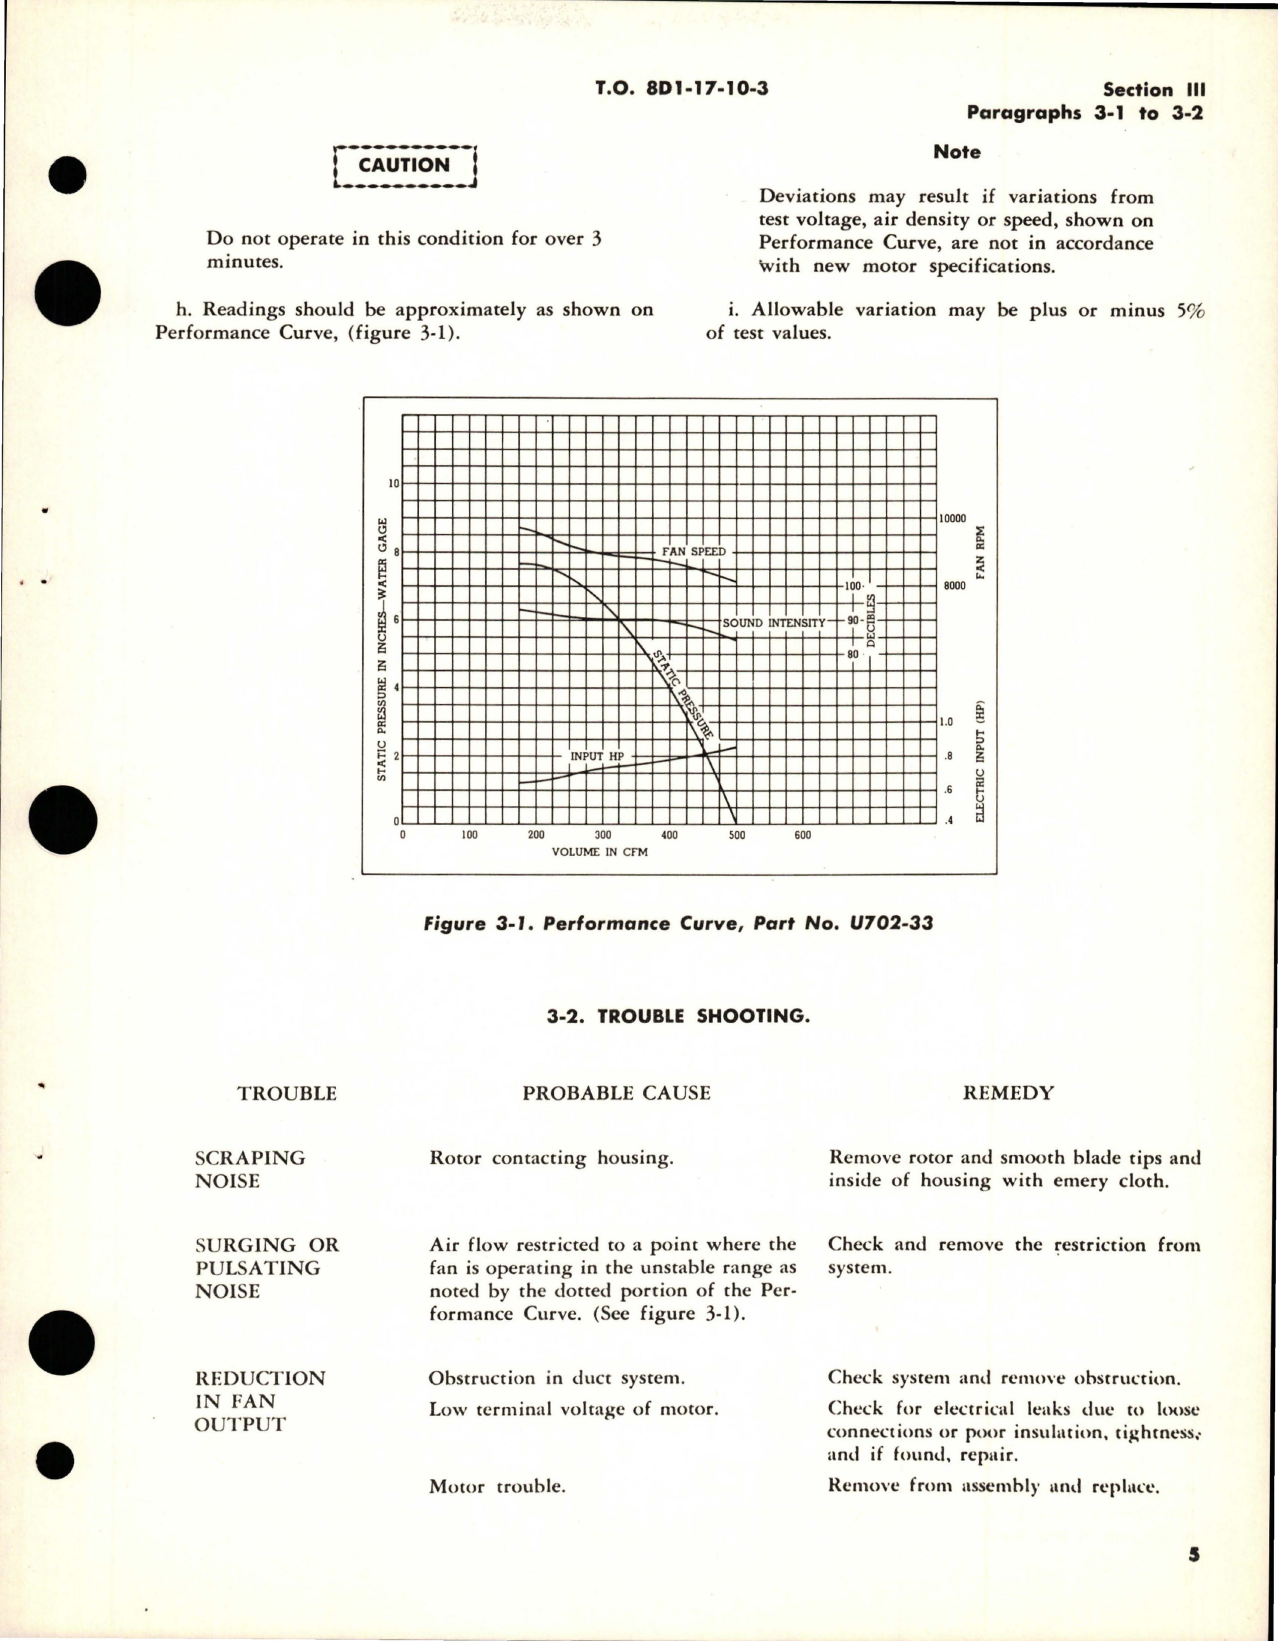 Sample page 7 from AirCorps Library document: Overhaul Instructions for Axivane Aircraft Fans